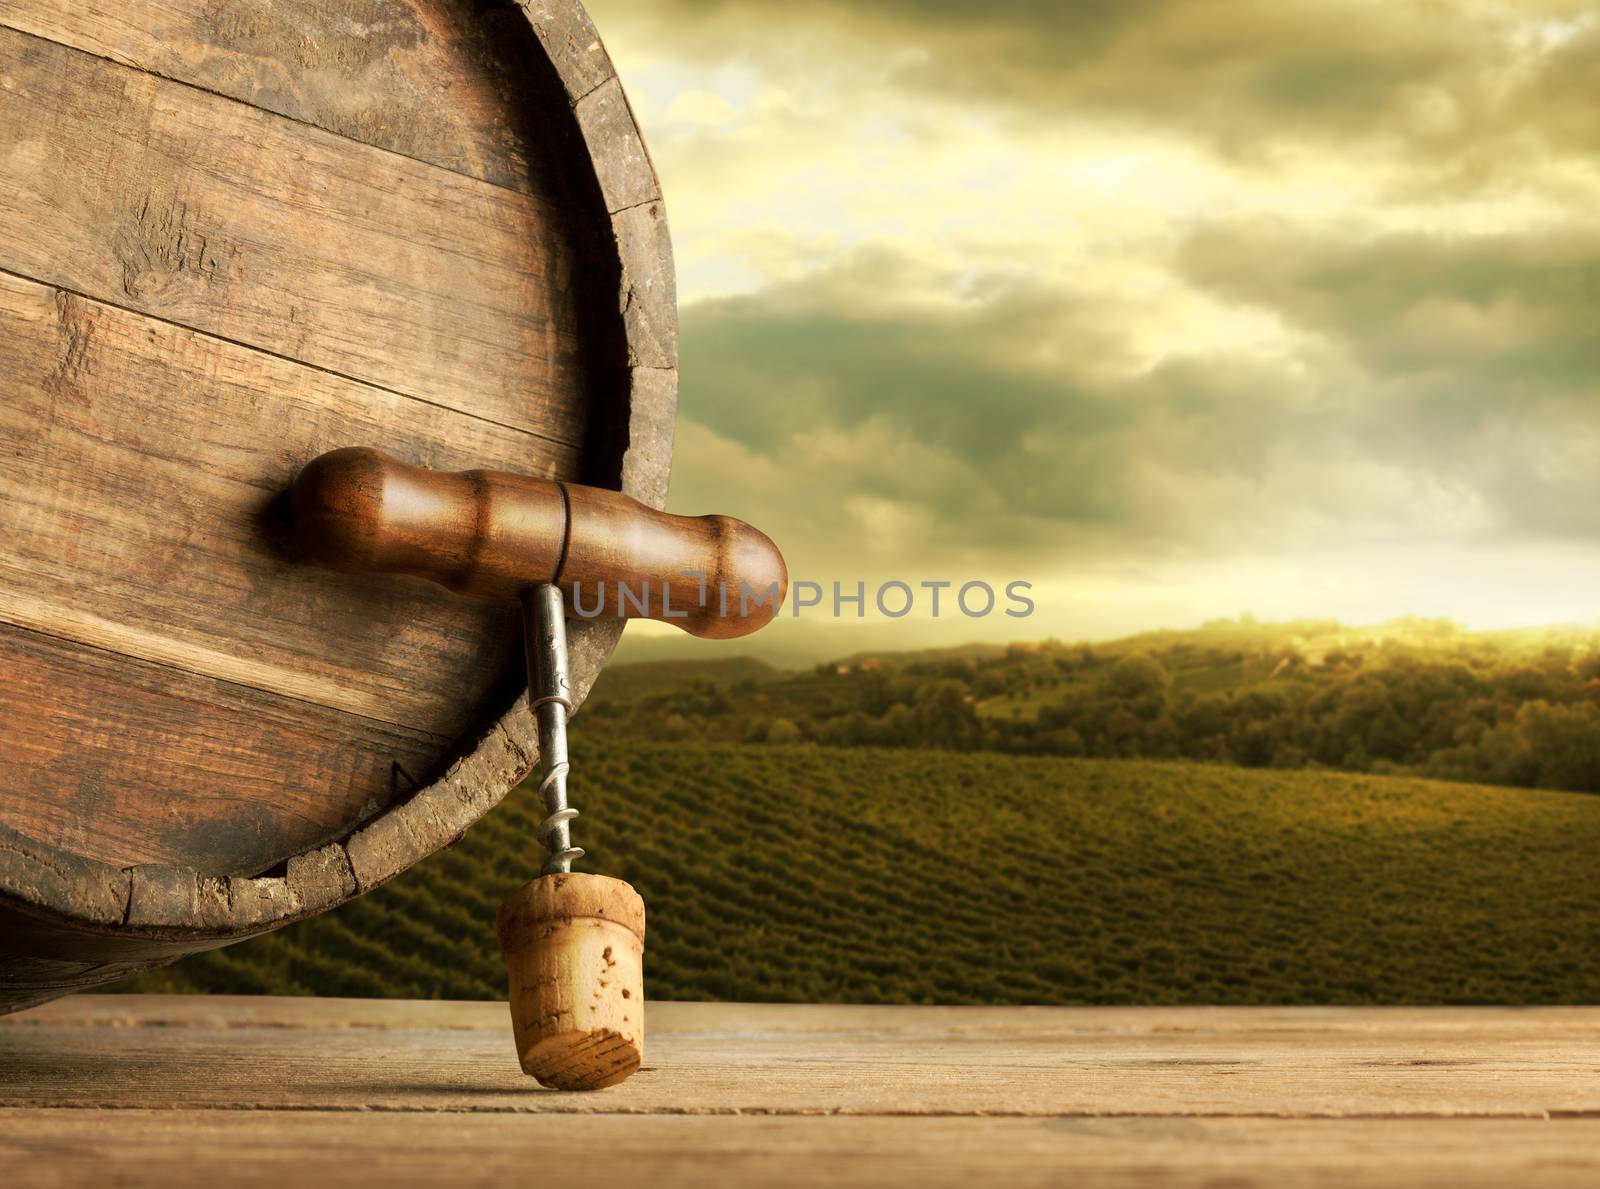 Wooden barrel and corkscrew close up with vineyards and rural landscape on background.